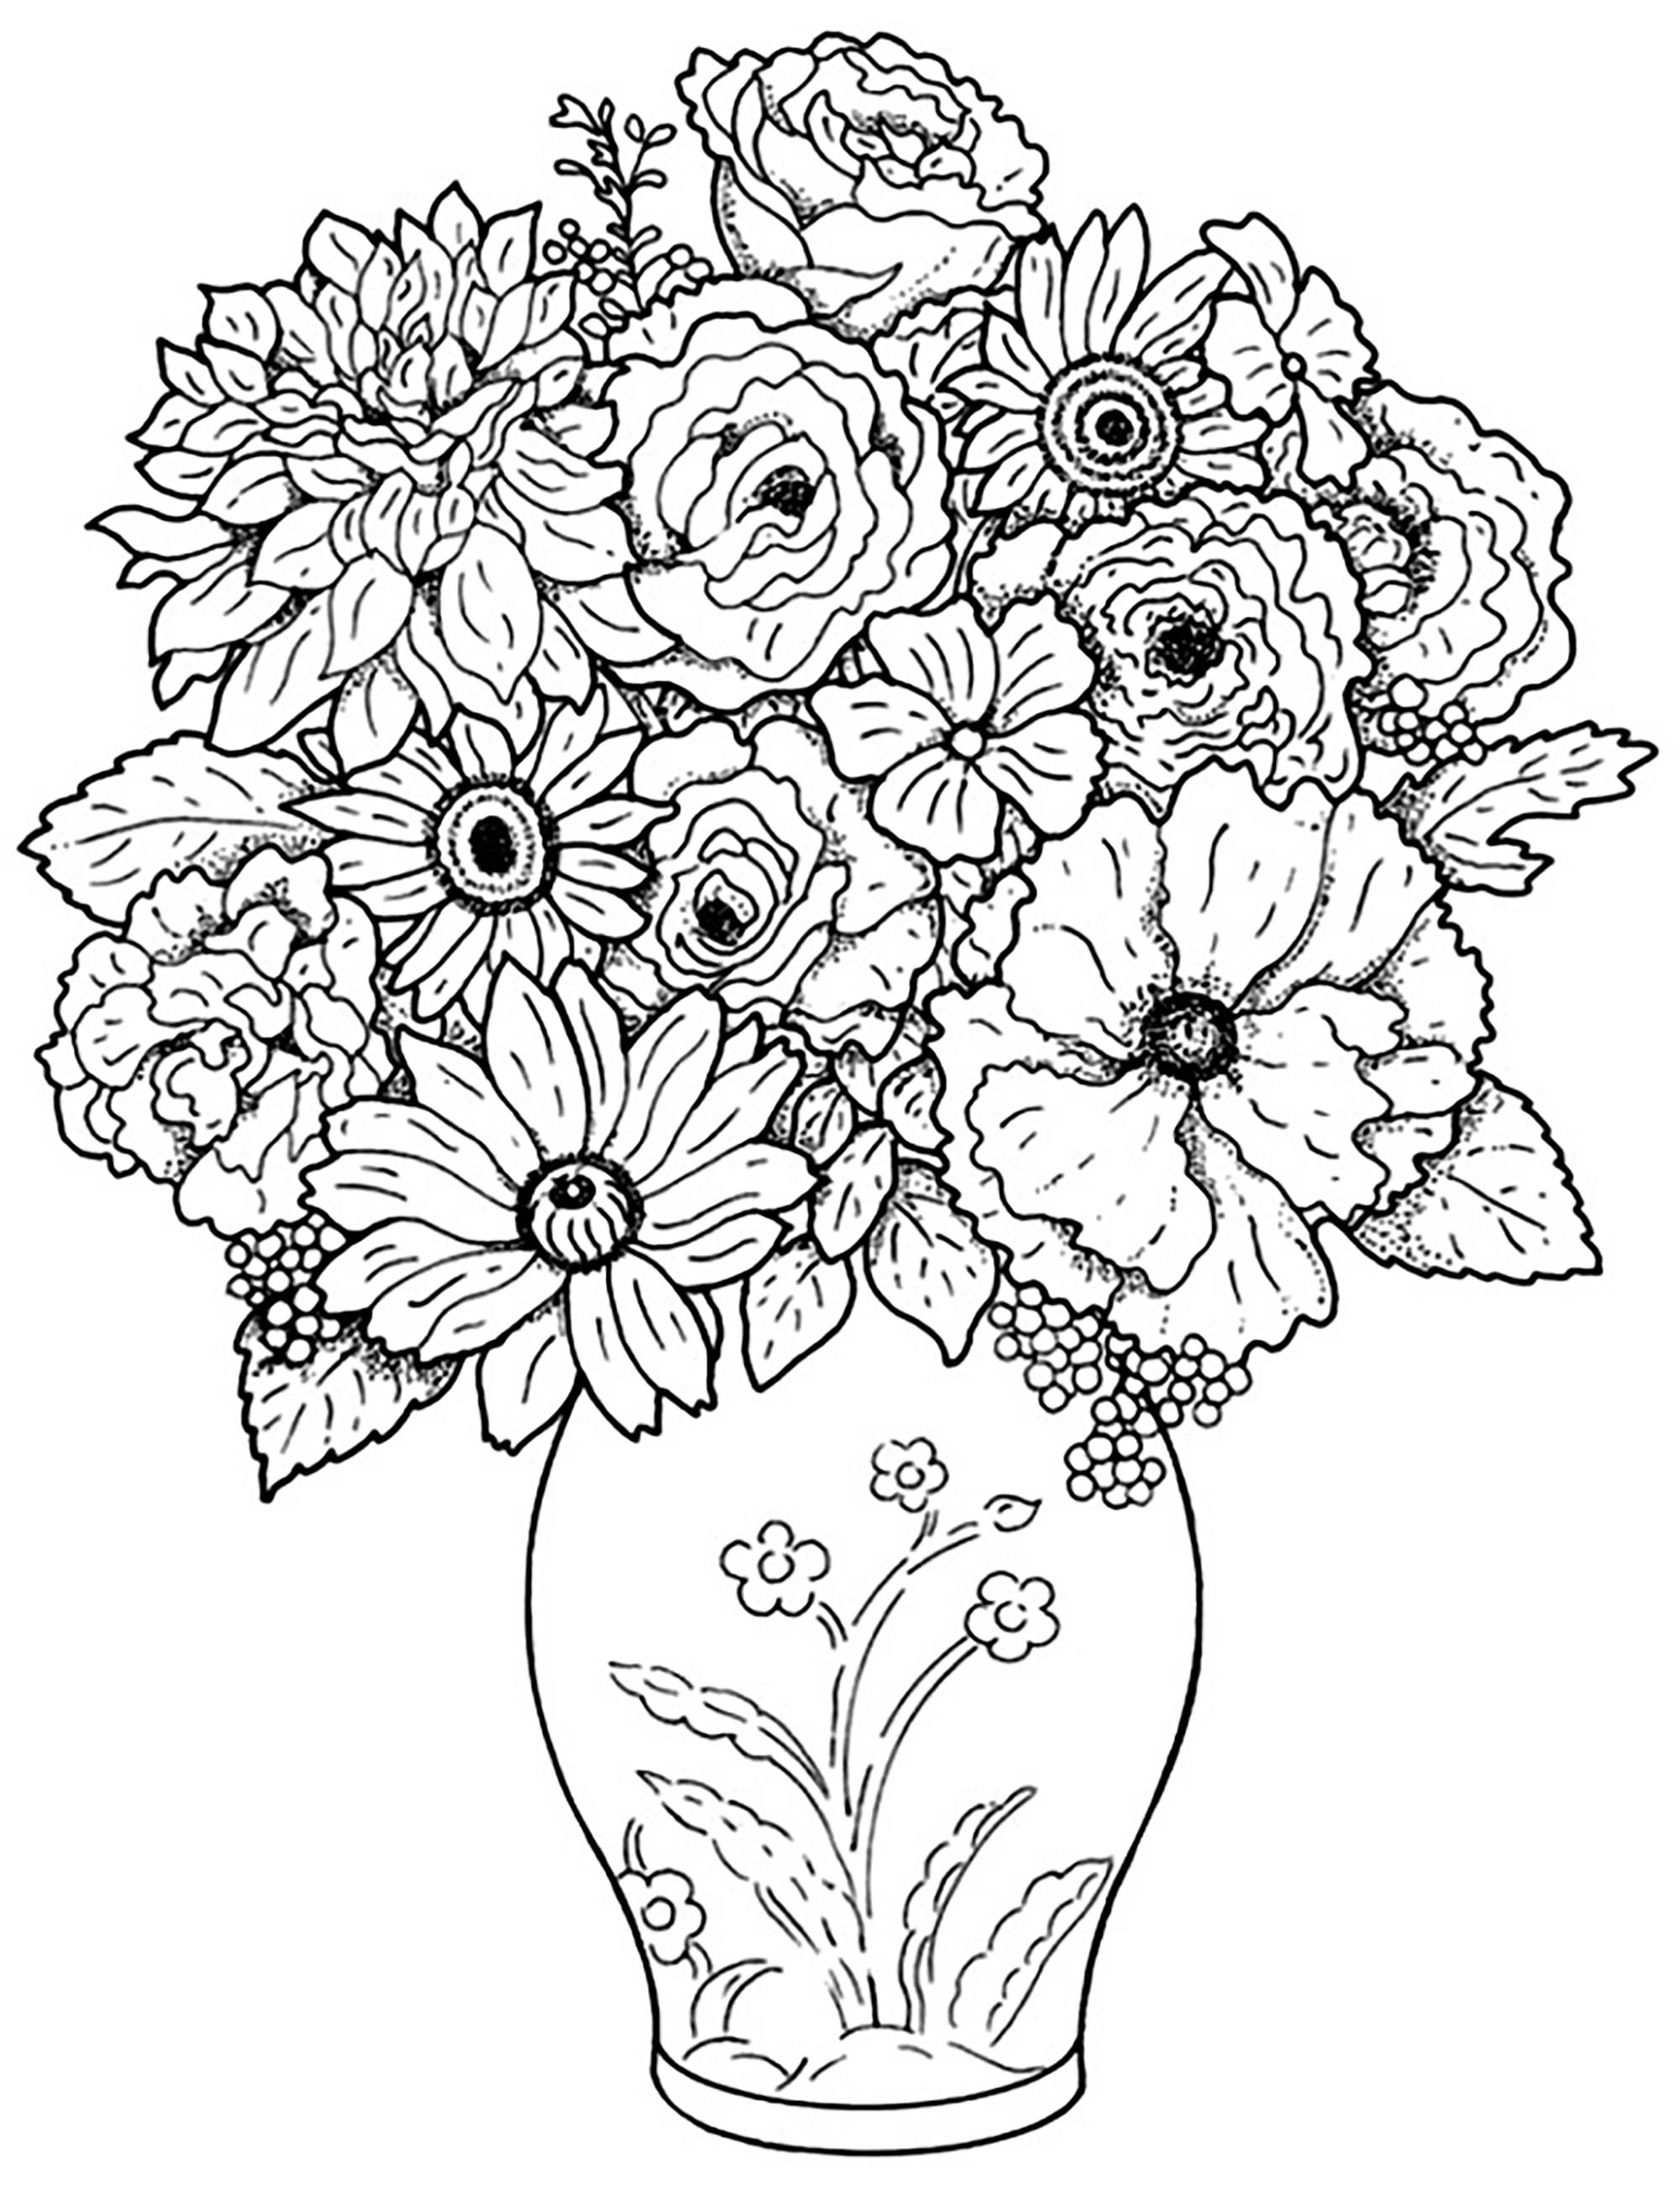 flower-bouquet-flowers-kids-coloring-pages